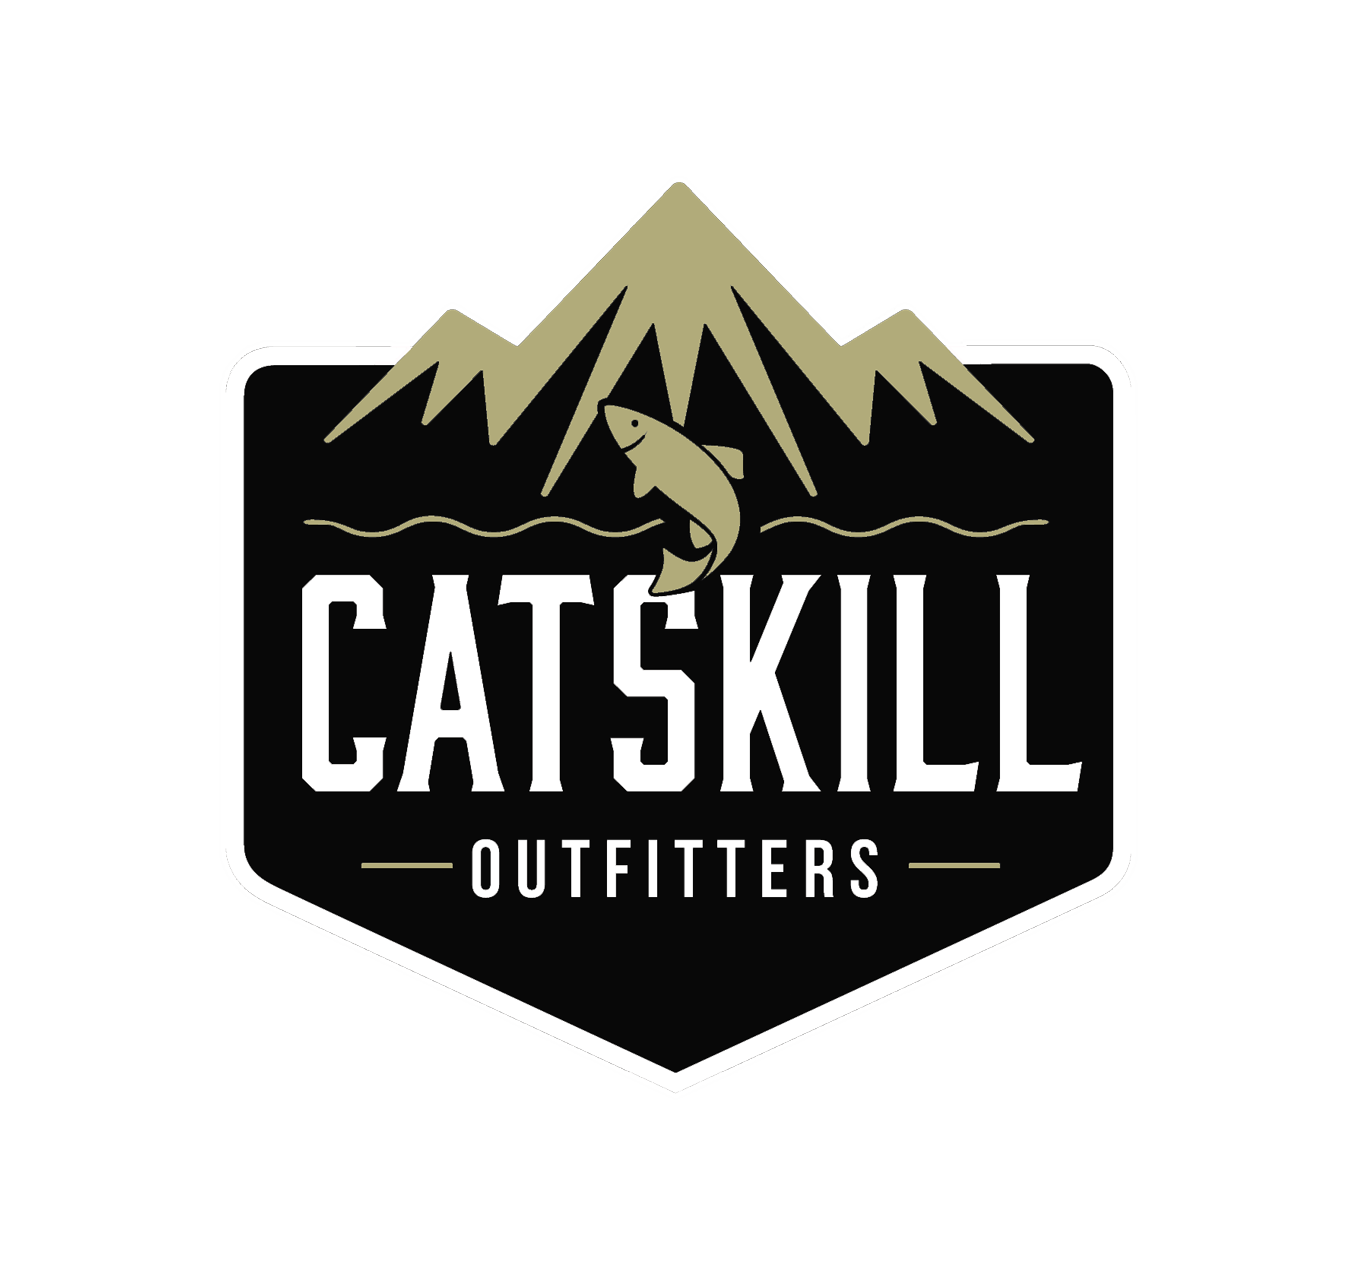 Father's Day June 20th - Catskill Outfitters